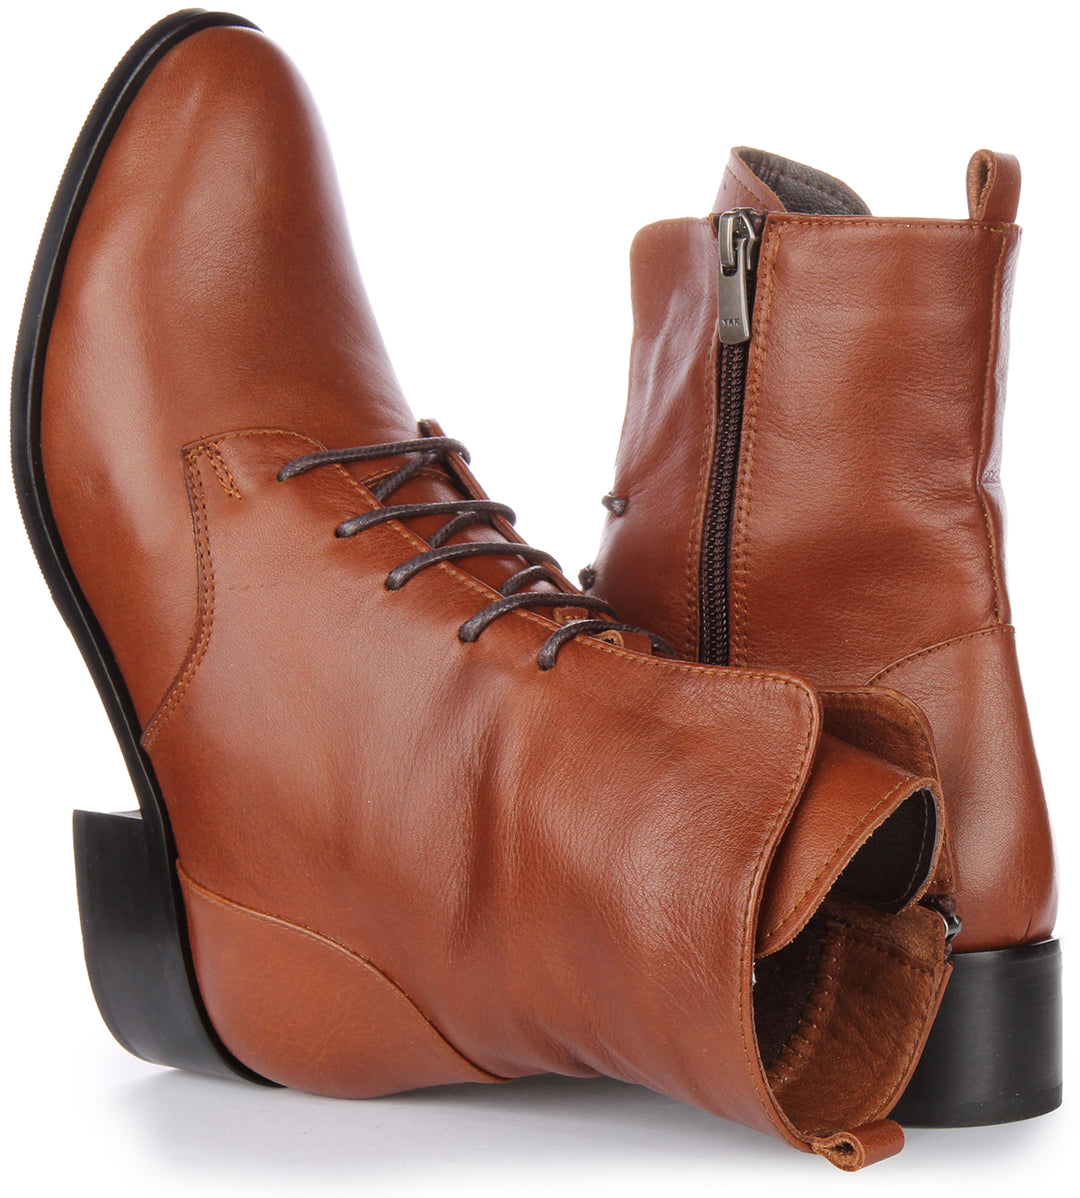 Clair Ankle Boots In Tan